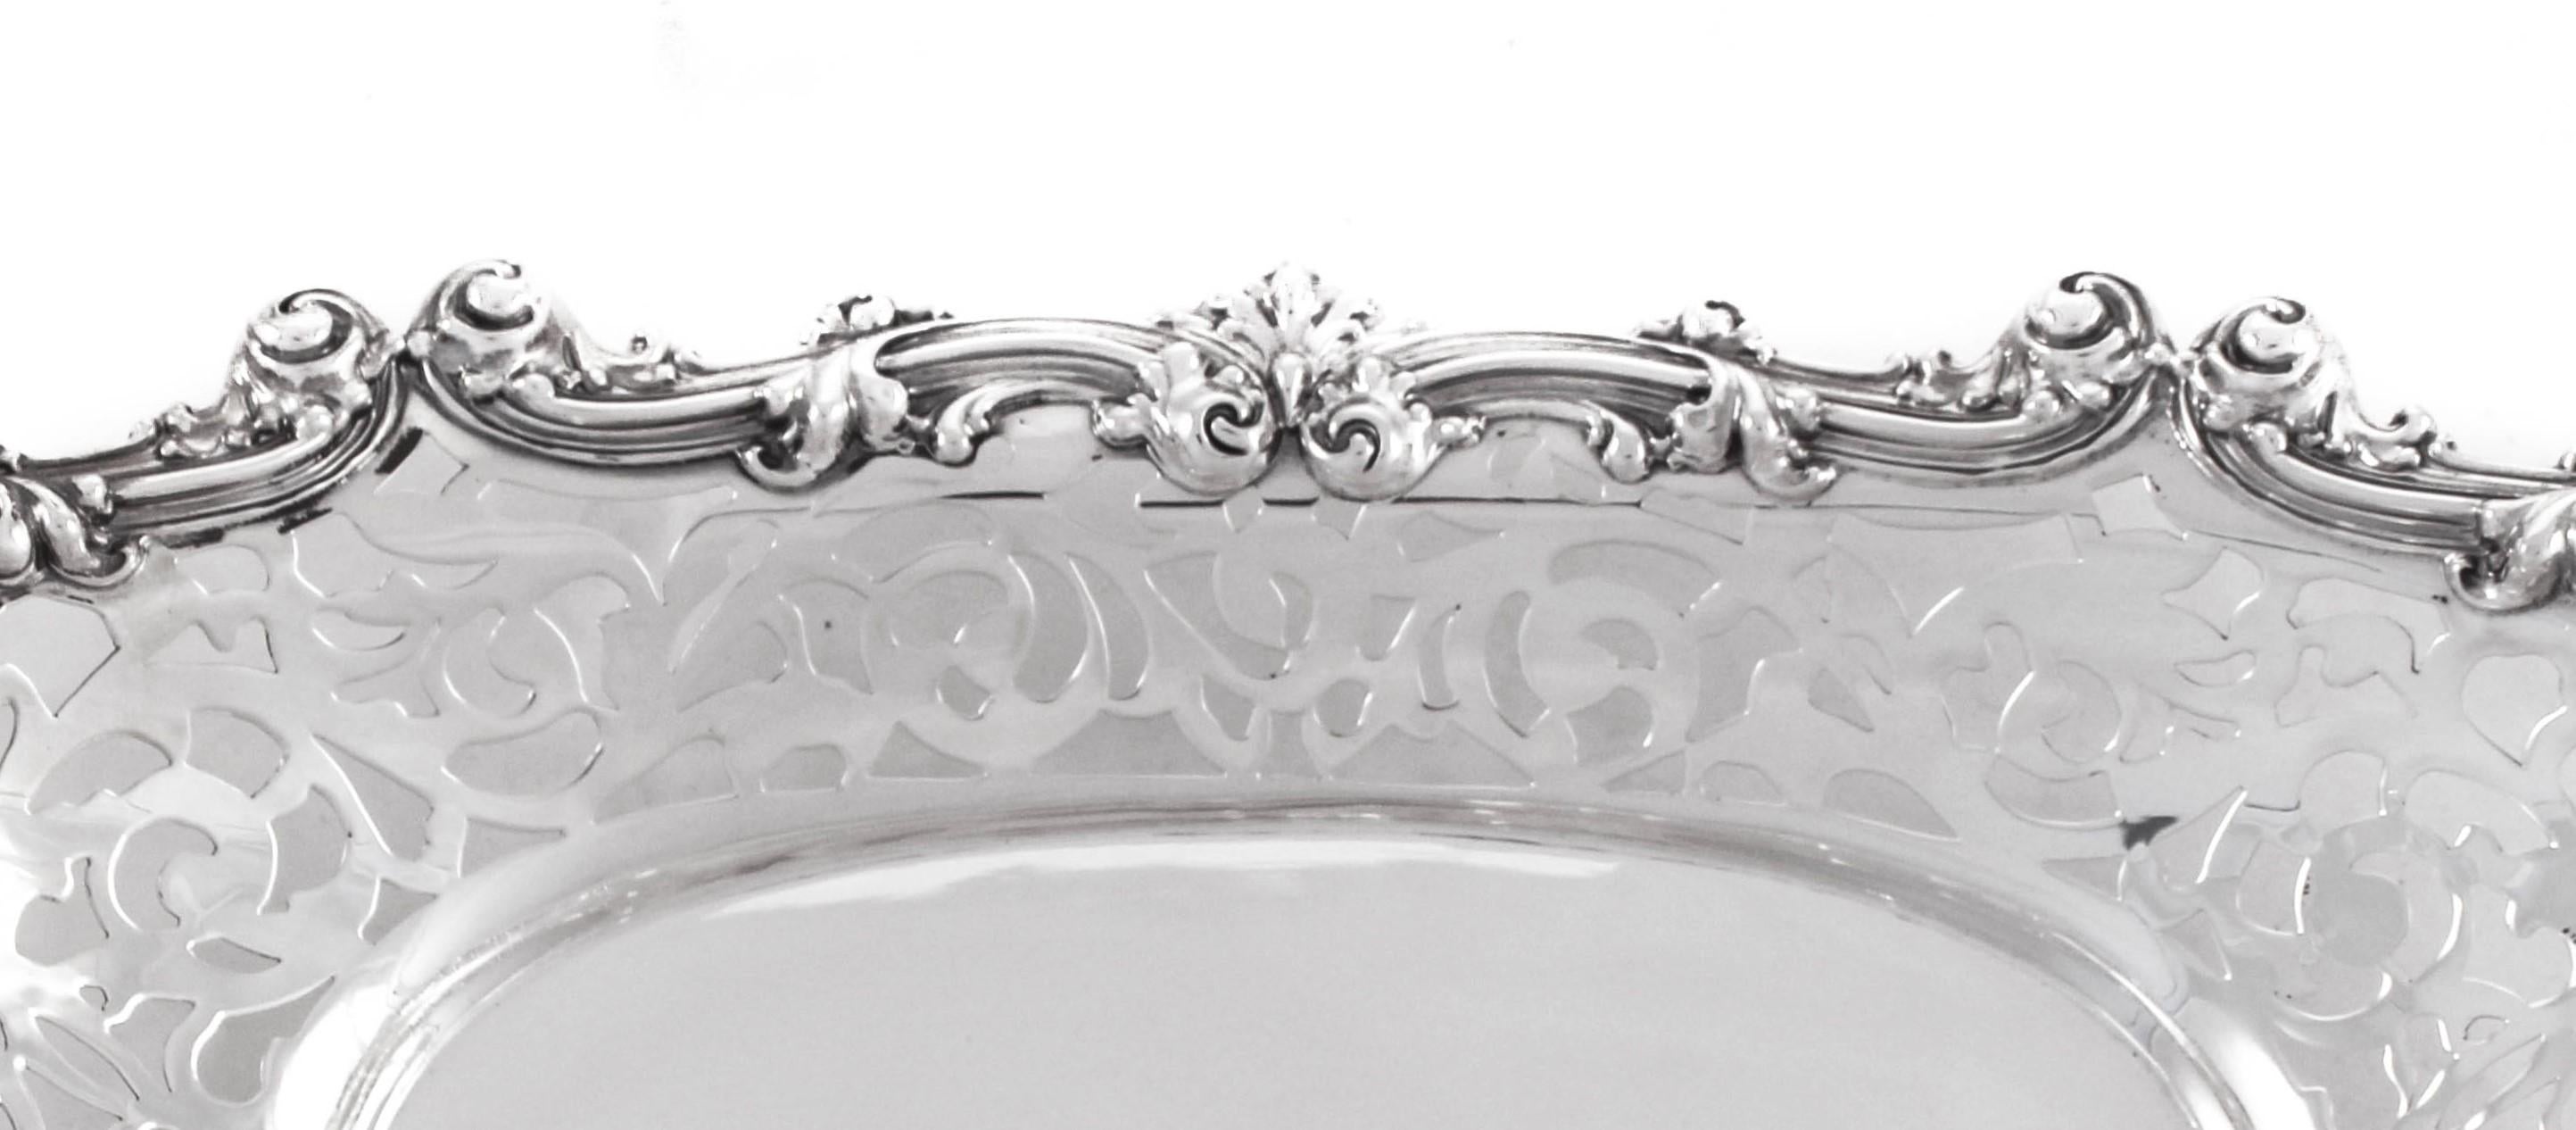 A reticulated breadbasket by one of the greatest Silversmiths in American history, George Shiebler. His pieces are extremely rare and very sought after. This lovely piece has a rich and delicate air, but actually heavy and has withstood the test of